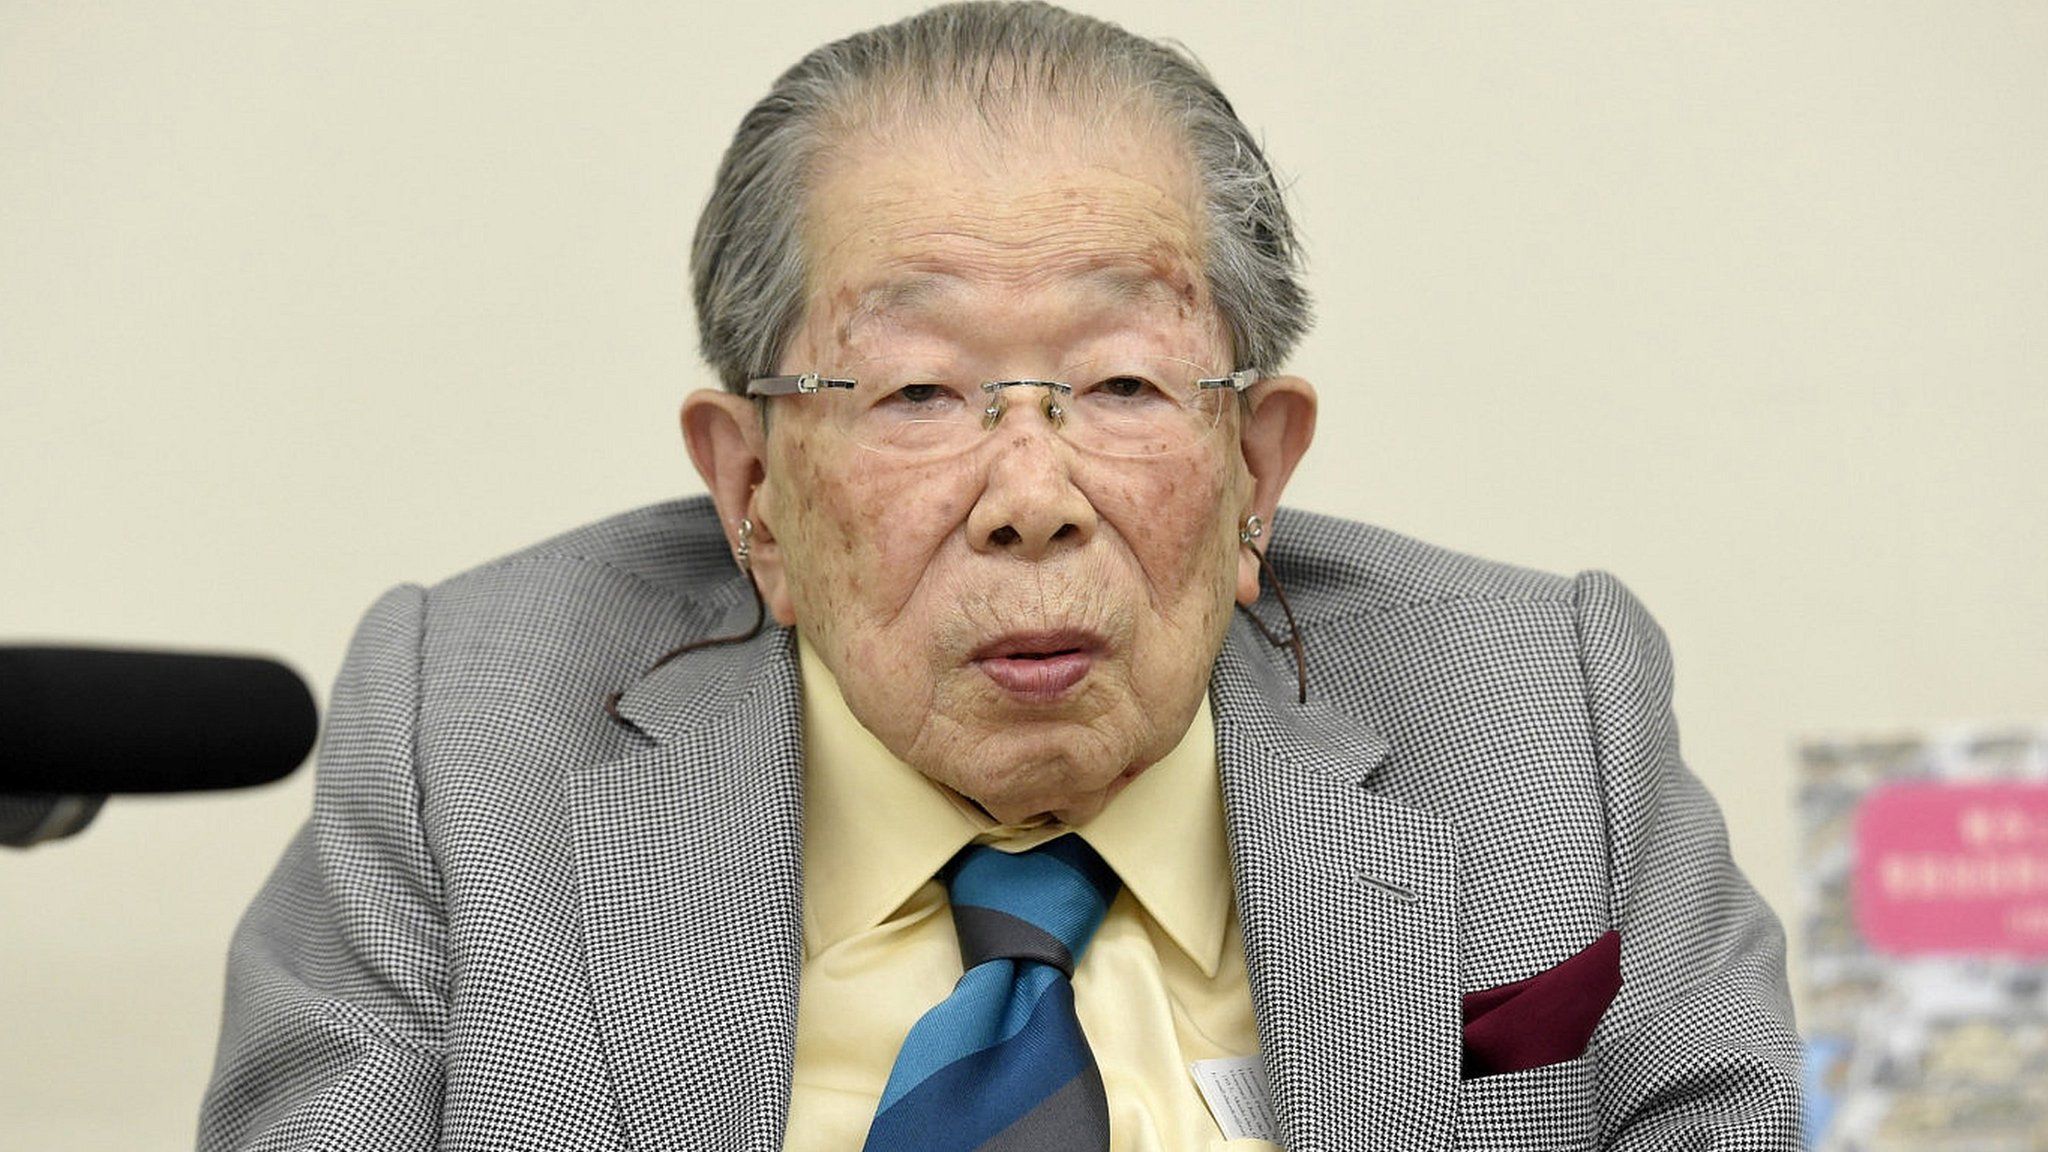 Japanese doctor Shigeaki Hinohara attends a news conference in Tokyo, Japan by Kyodo on September 25, 2015